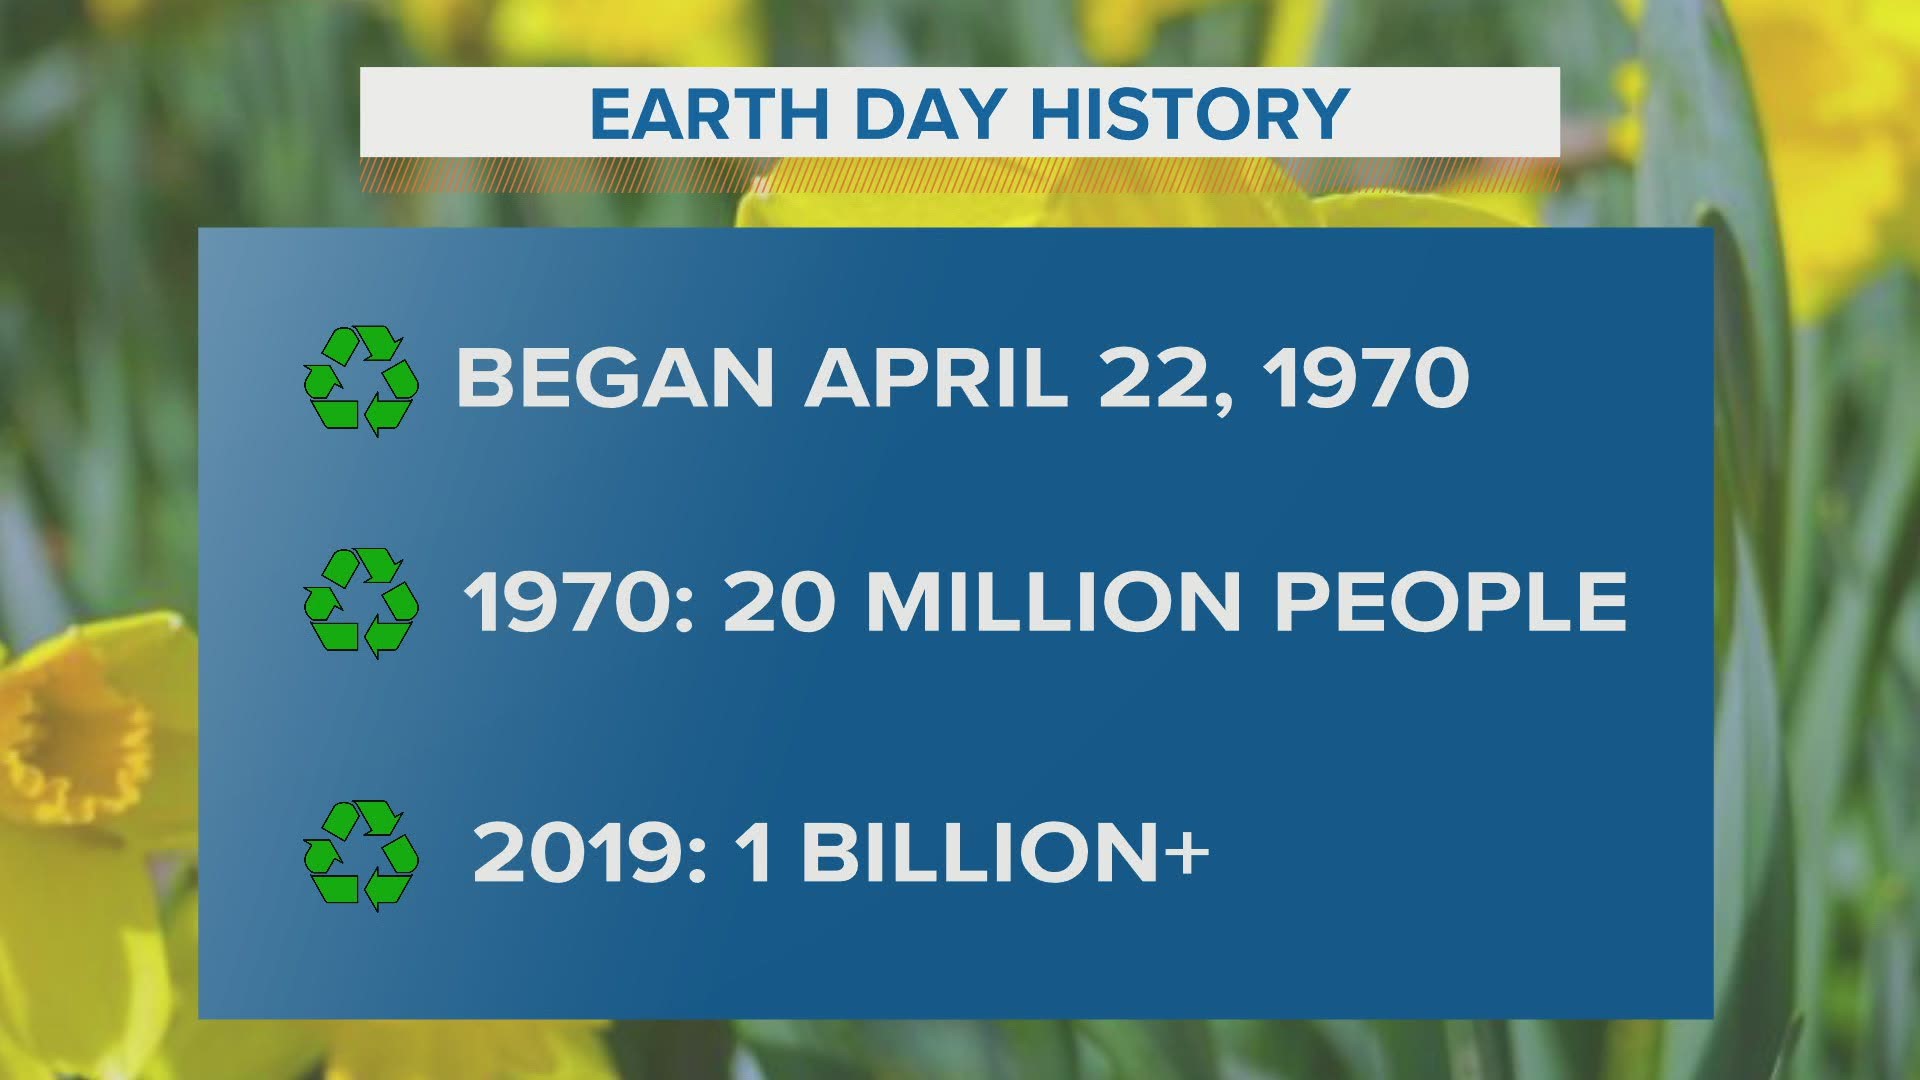 Celebrations for the 50th anniversary of Earth Day continue, despite social distancing and no gathering due to the coronavirus pandemic.